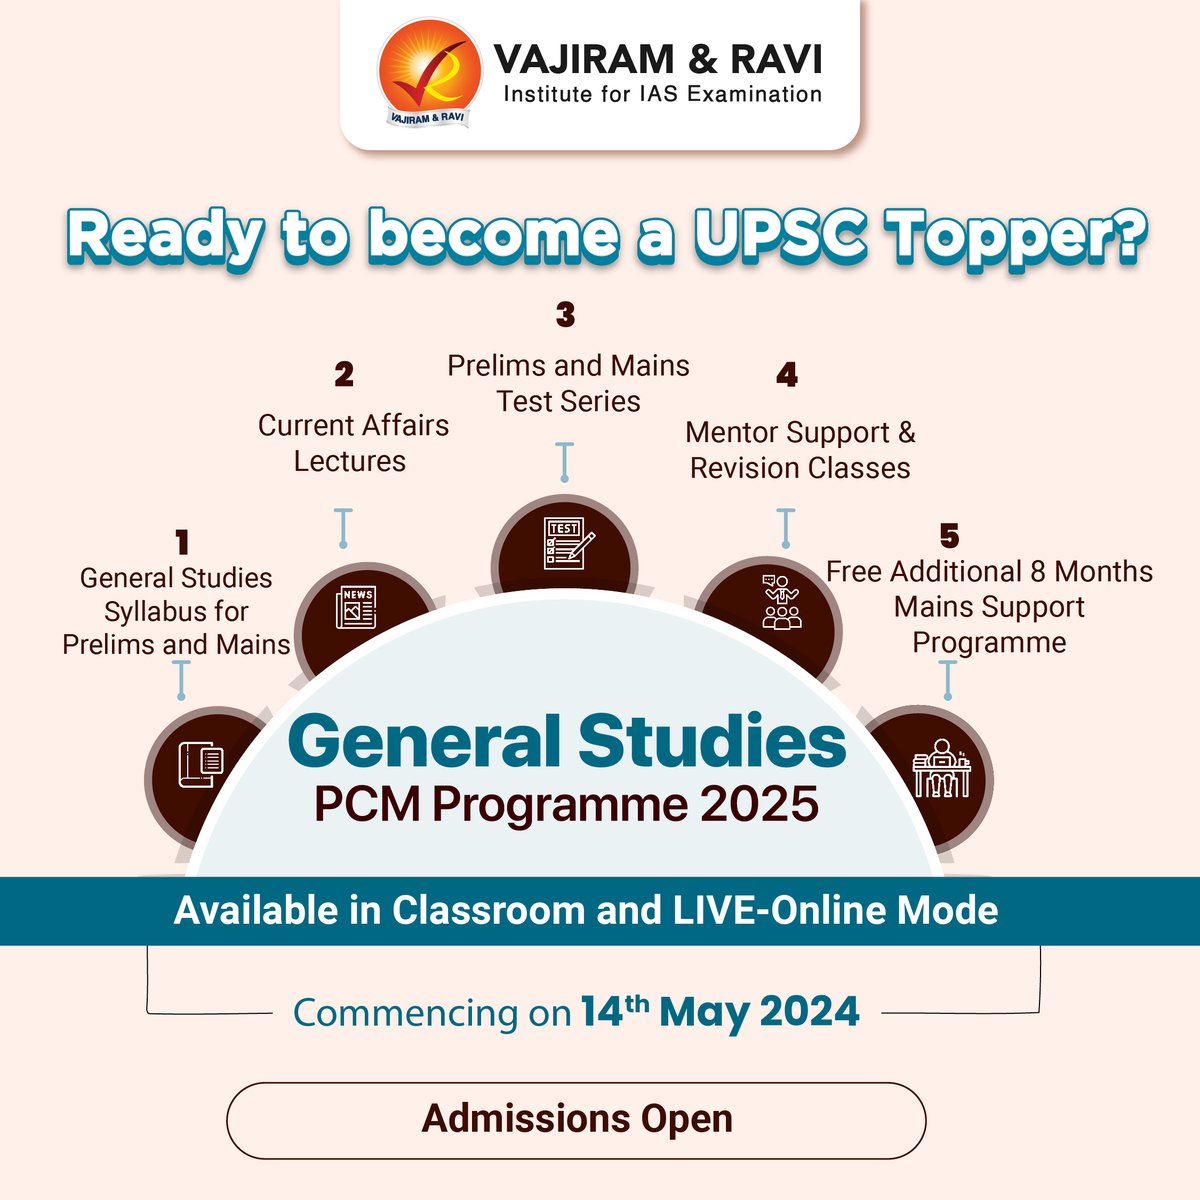 Turn your IAS dream into reality by embarking on a transformative journey with our Prelims Cum Mains General Studies Programme. 

To know more, visit - bit.ly/vajiram-gs-pcm

#upsc #upscaspirant #upscexam #upscprelims #upscias #ias#iasexam #india #iasexam #iaspreparation